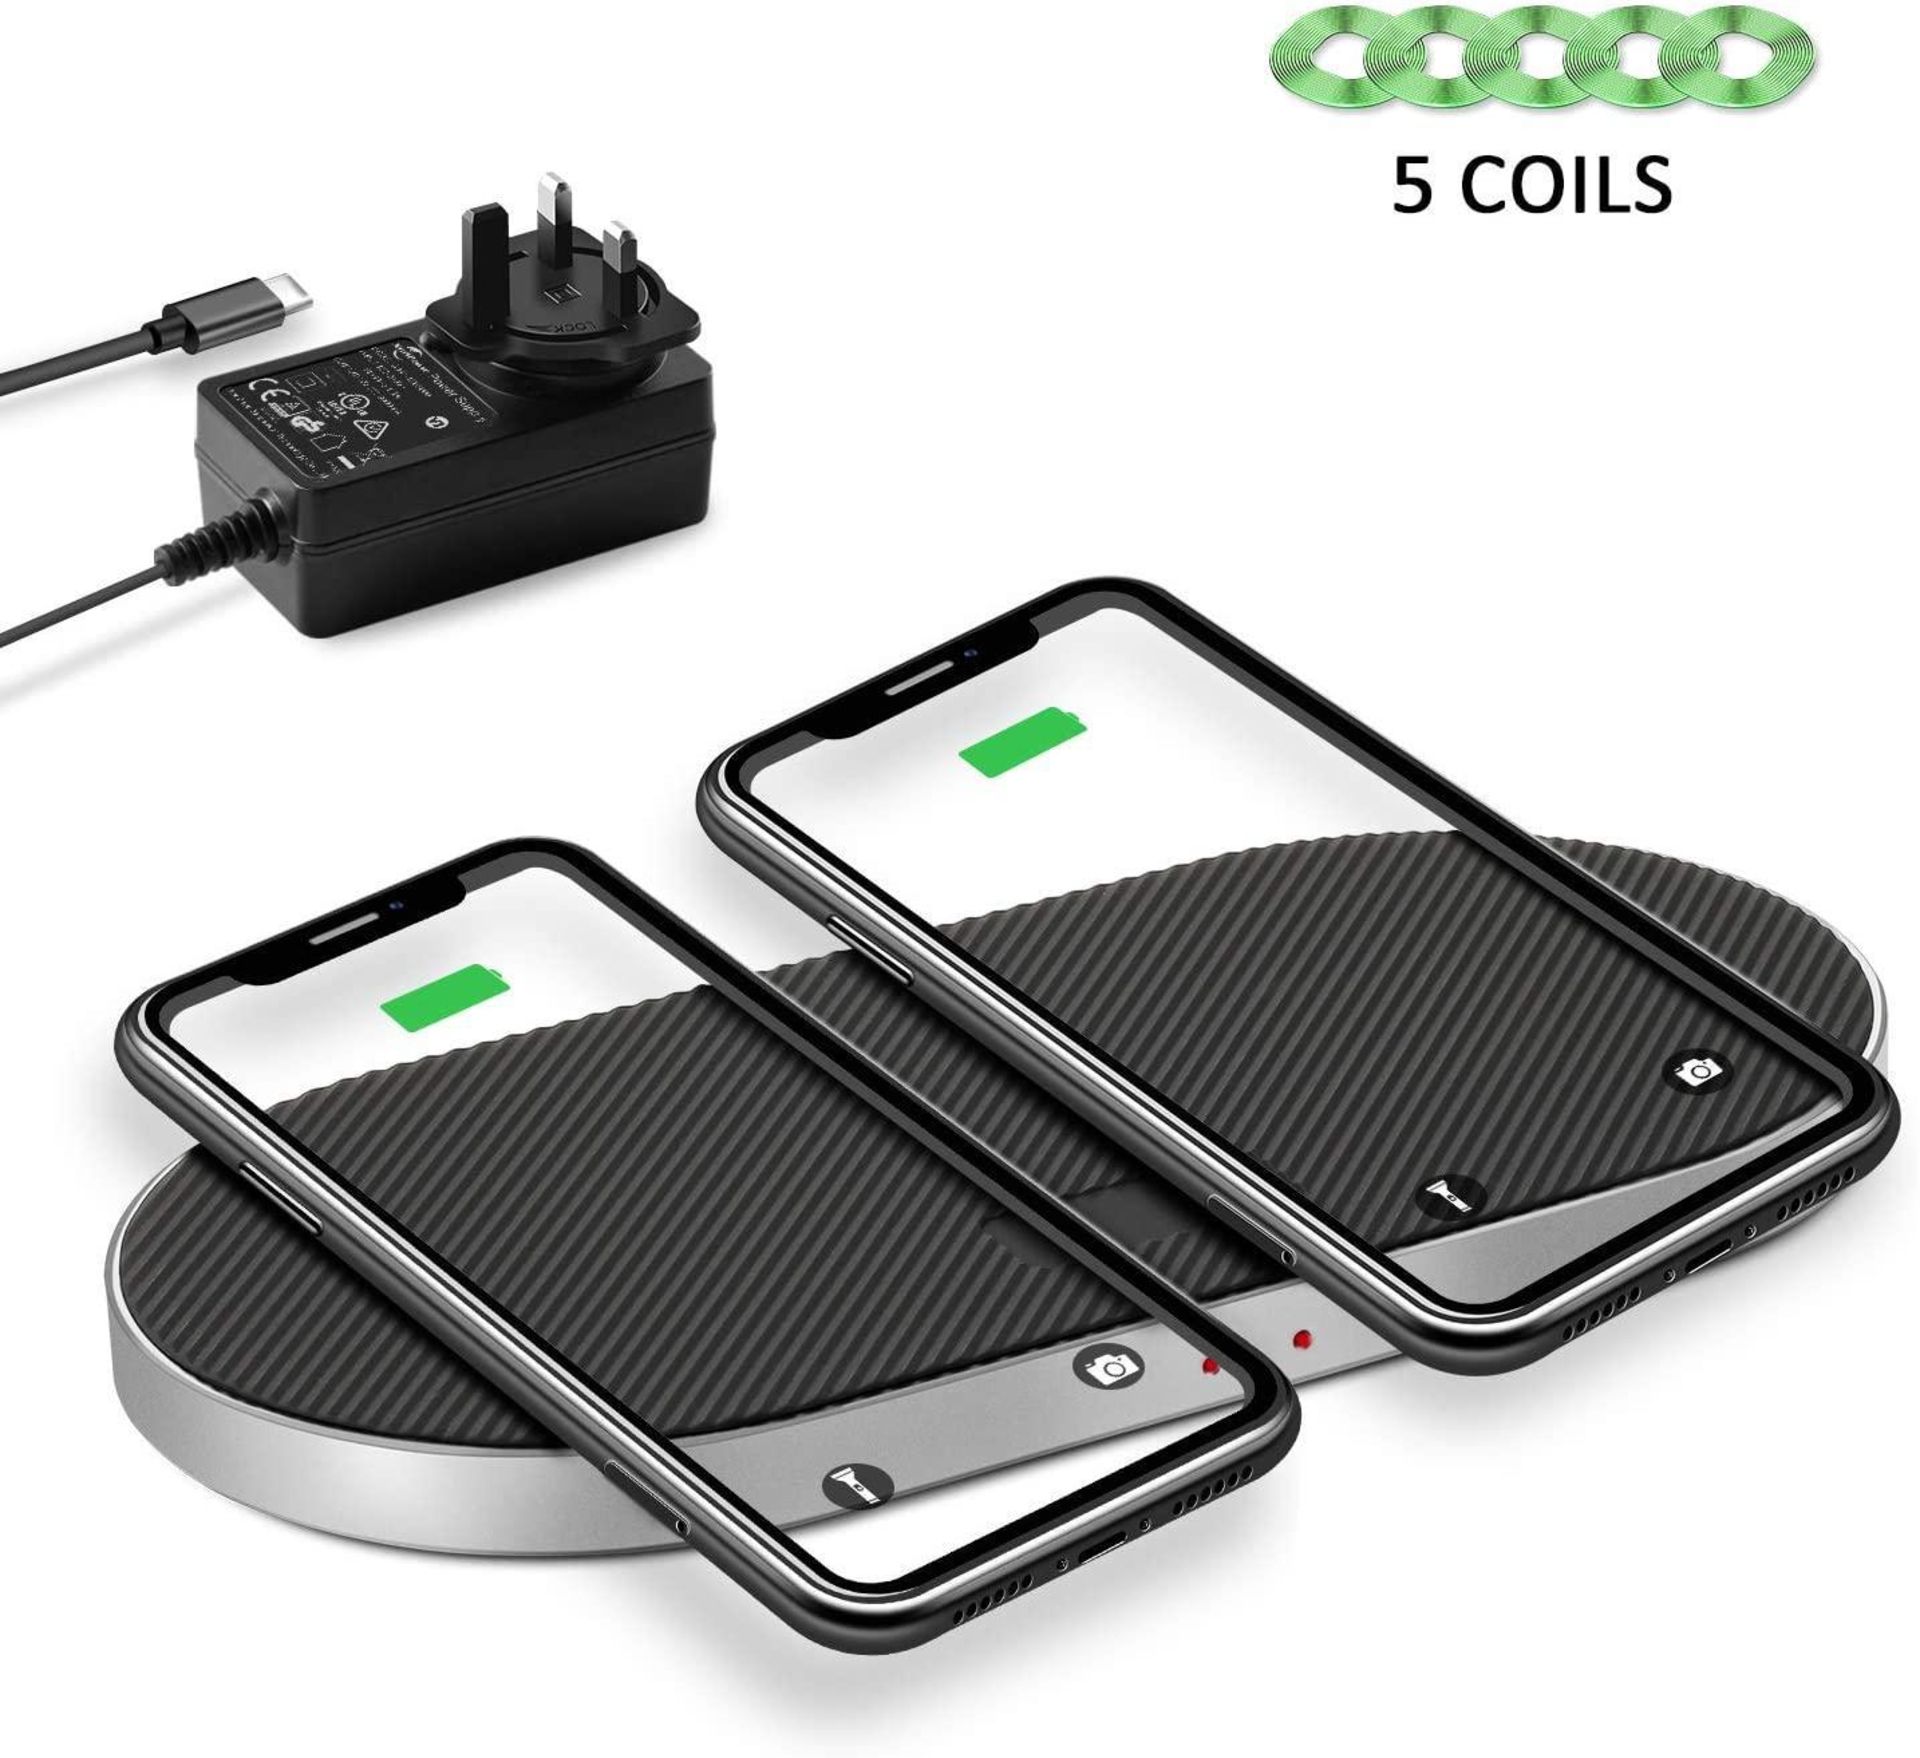 Zealsound Dual Fast Wireless Charging Pad, Aluminum 5 Coils Wireless Charger £36.99 RRP